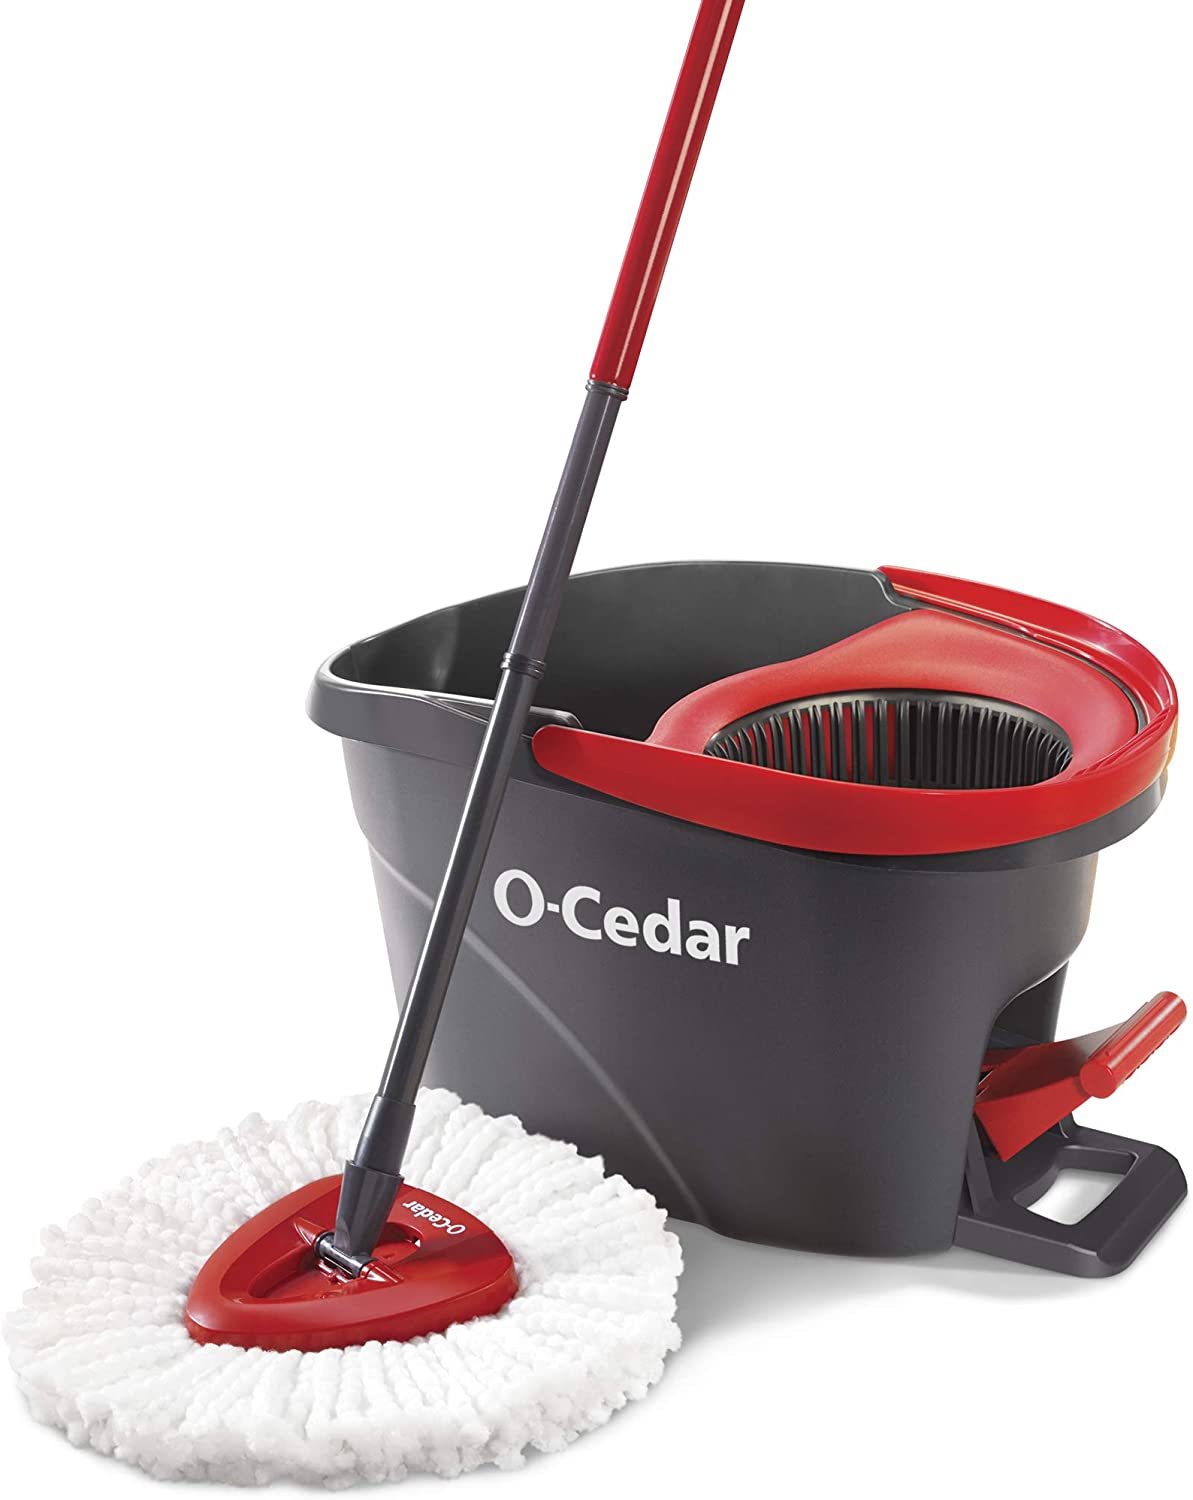 O-Cedar EasyWring Microfiber Spin Mop, Bucket Floor Cleaning System, Red, Gray 41